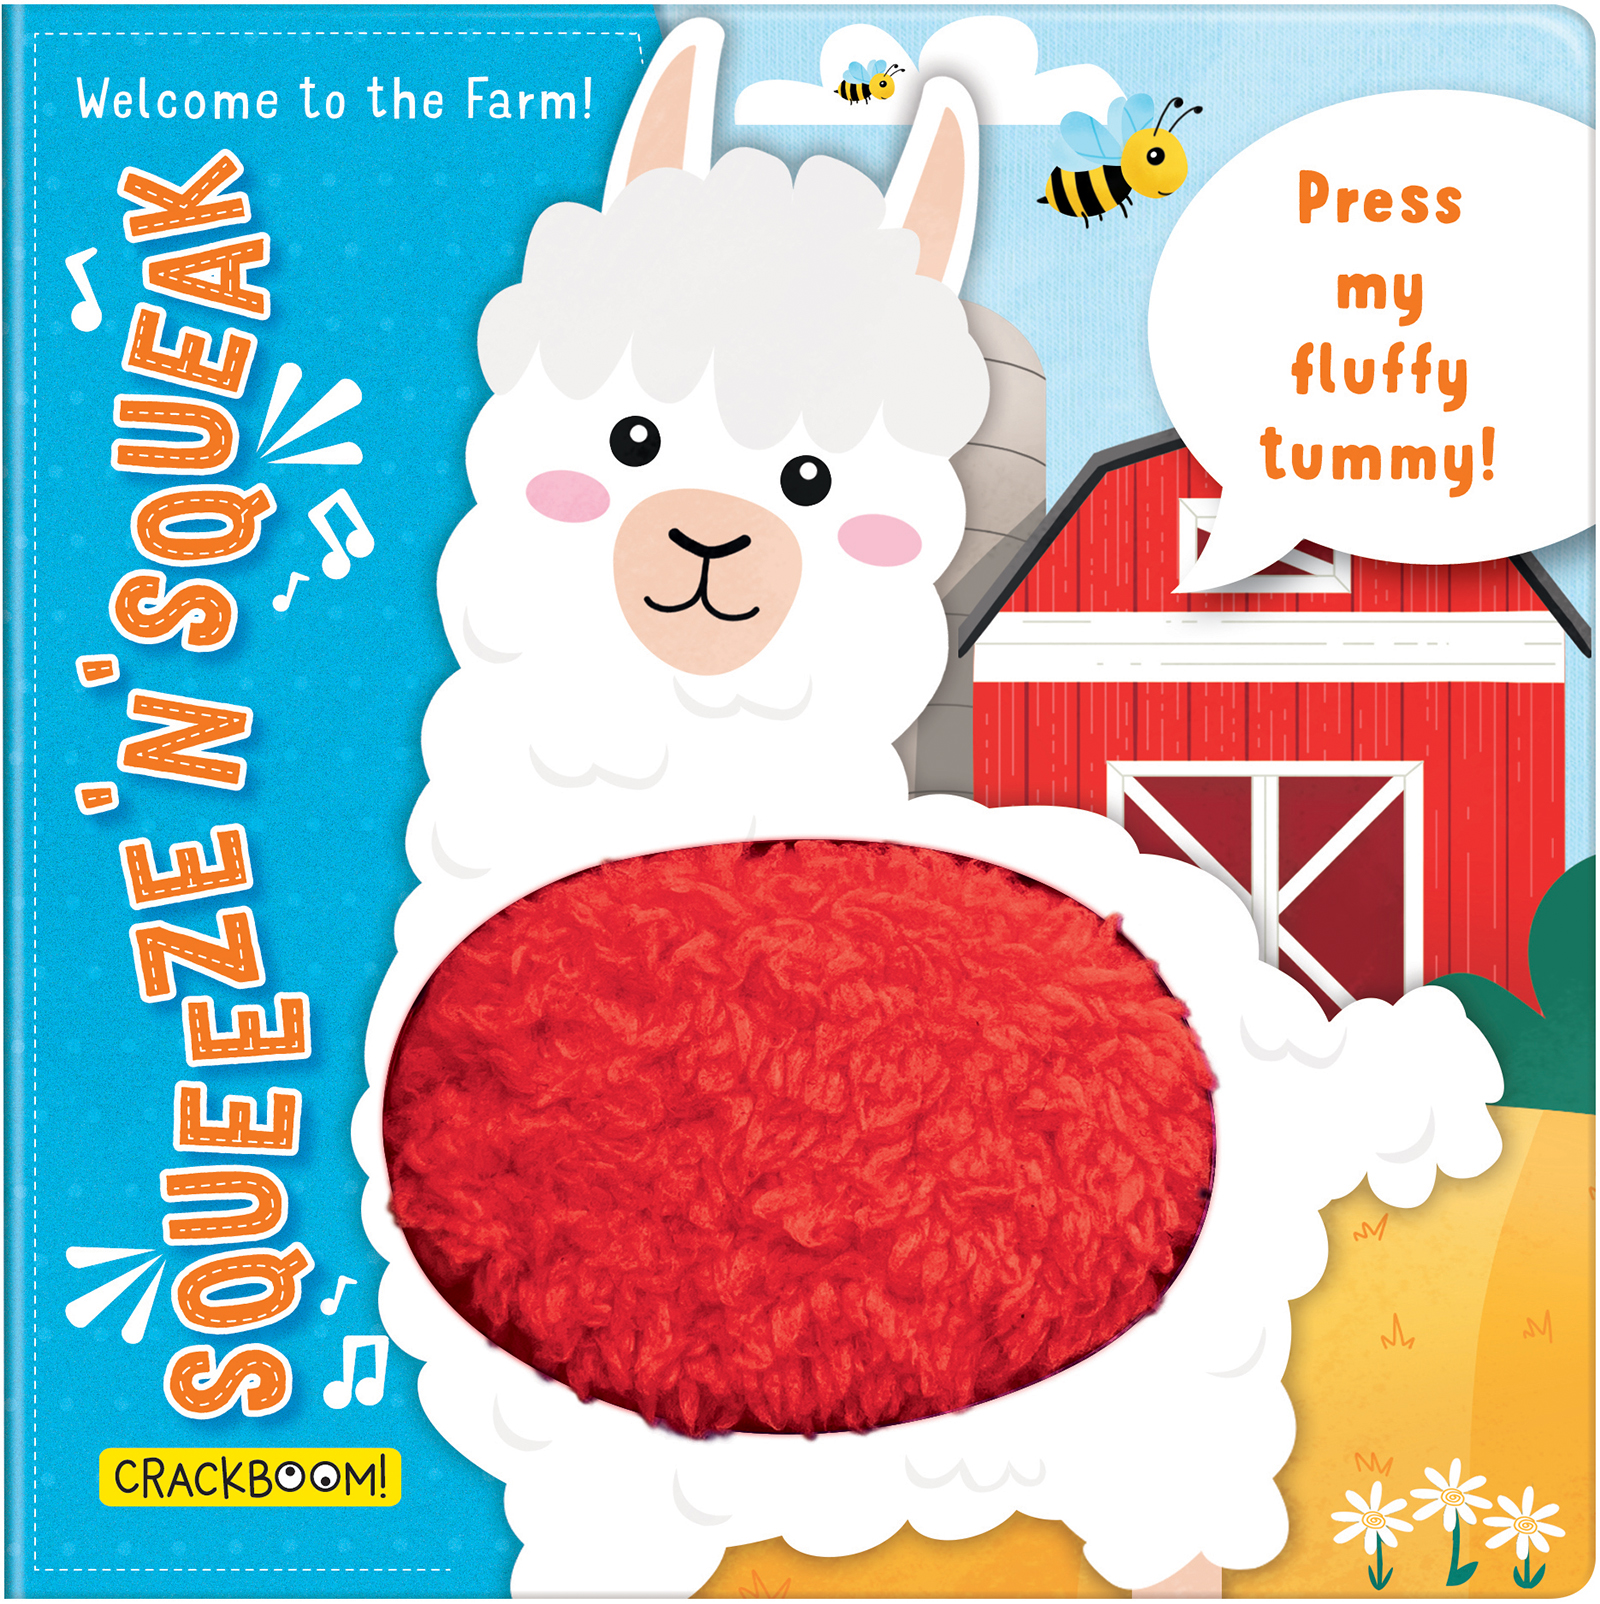 Squeeze n' Squeak: Welcome to the Farm!: Press my fluffy tummy!